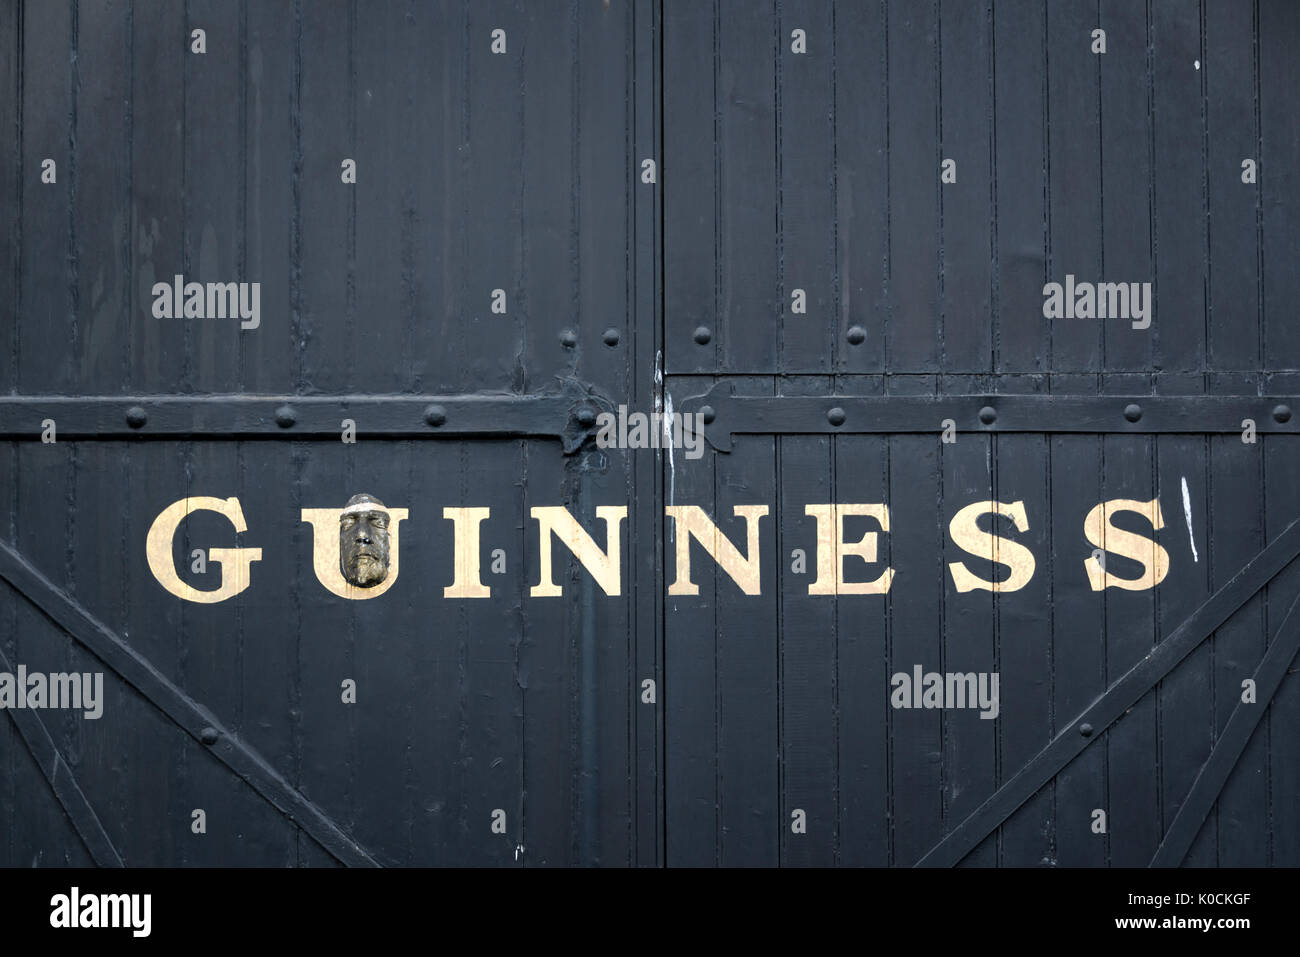 DUBLIN, IRELAND - AUGUST 14: Gate at the Guinness storehouse brewery. The Guinness Storehouse is a popular tourist attraction in Dublin Stock Photo